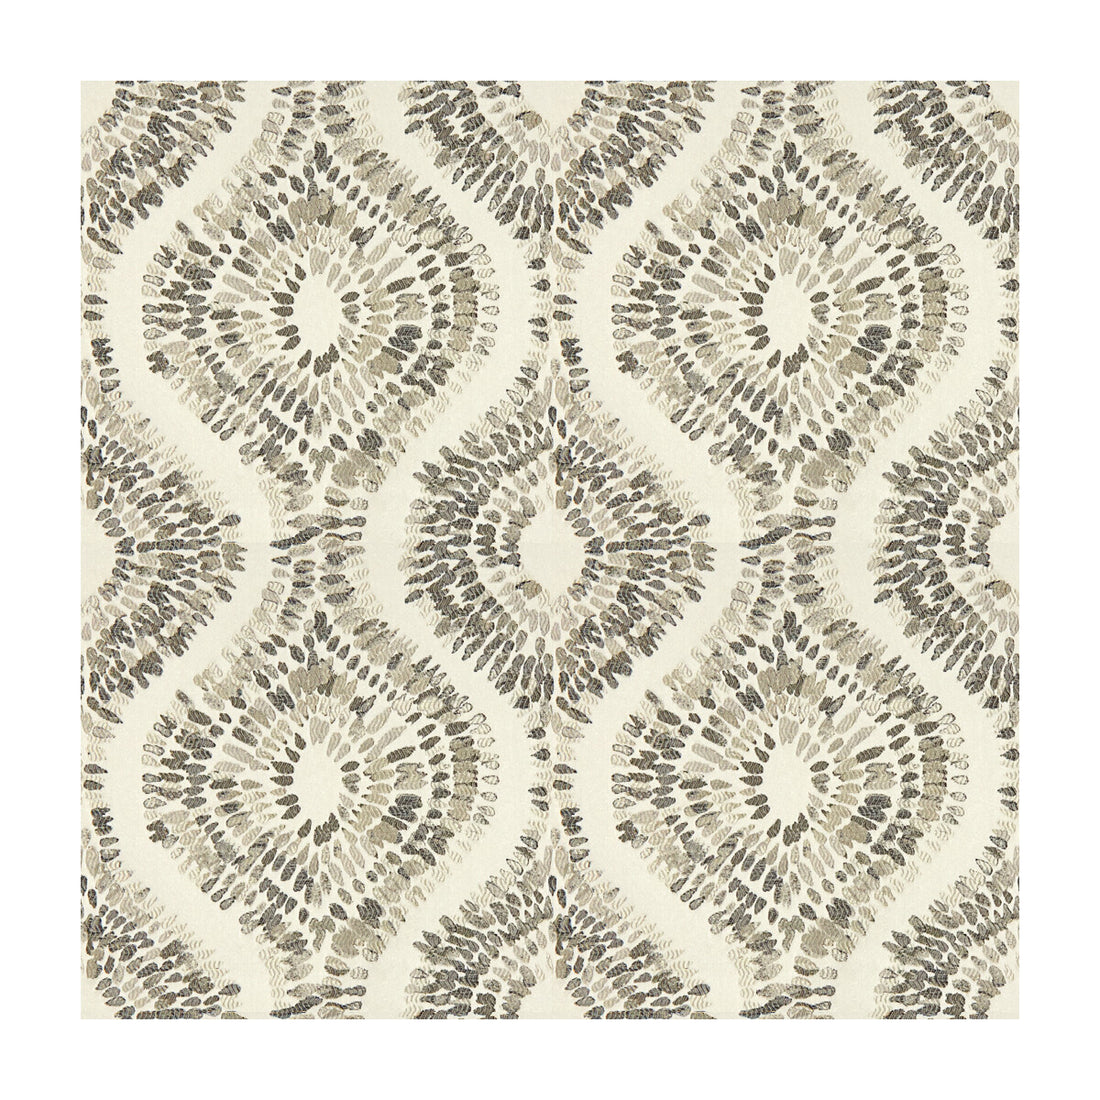 Sun Pillar fabric in steel color - pattern 34178.1611.0 - by Kravet Design in the Candice Olson collection